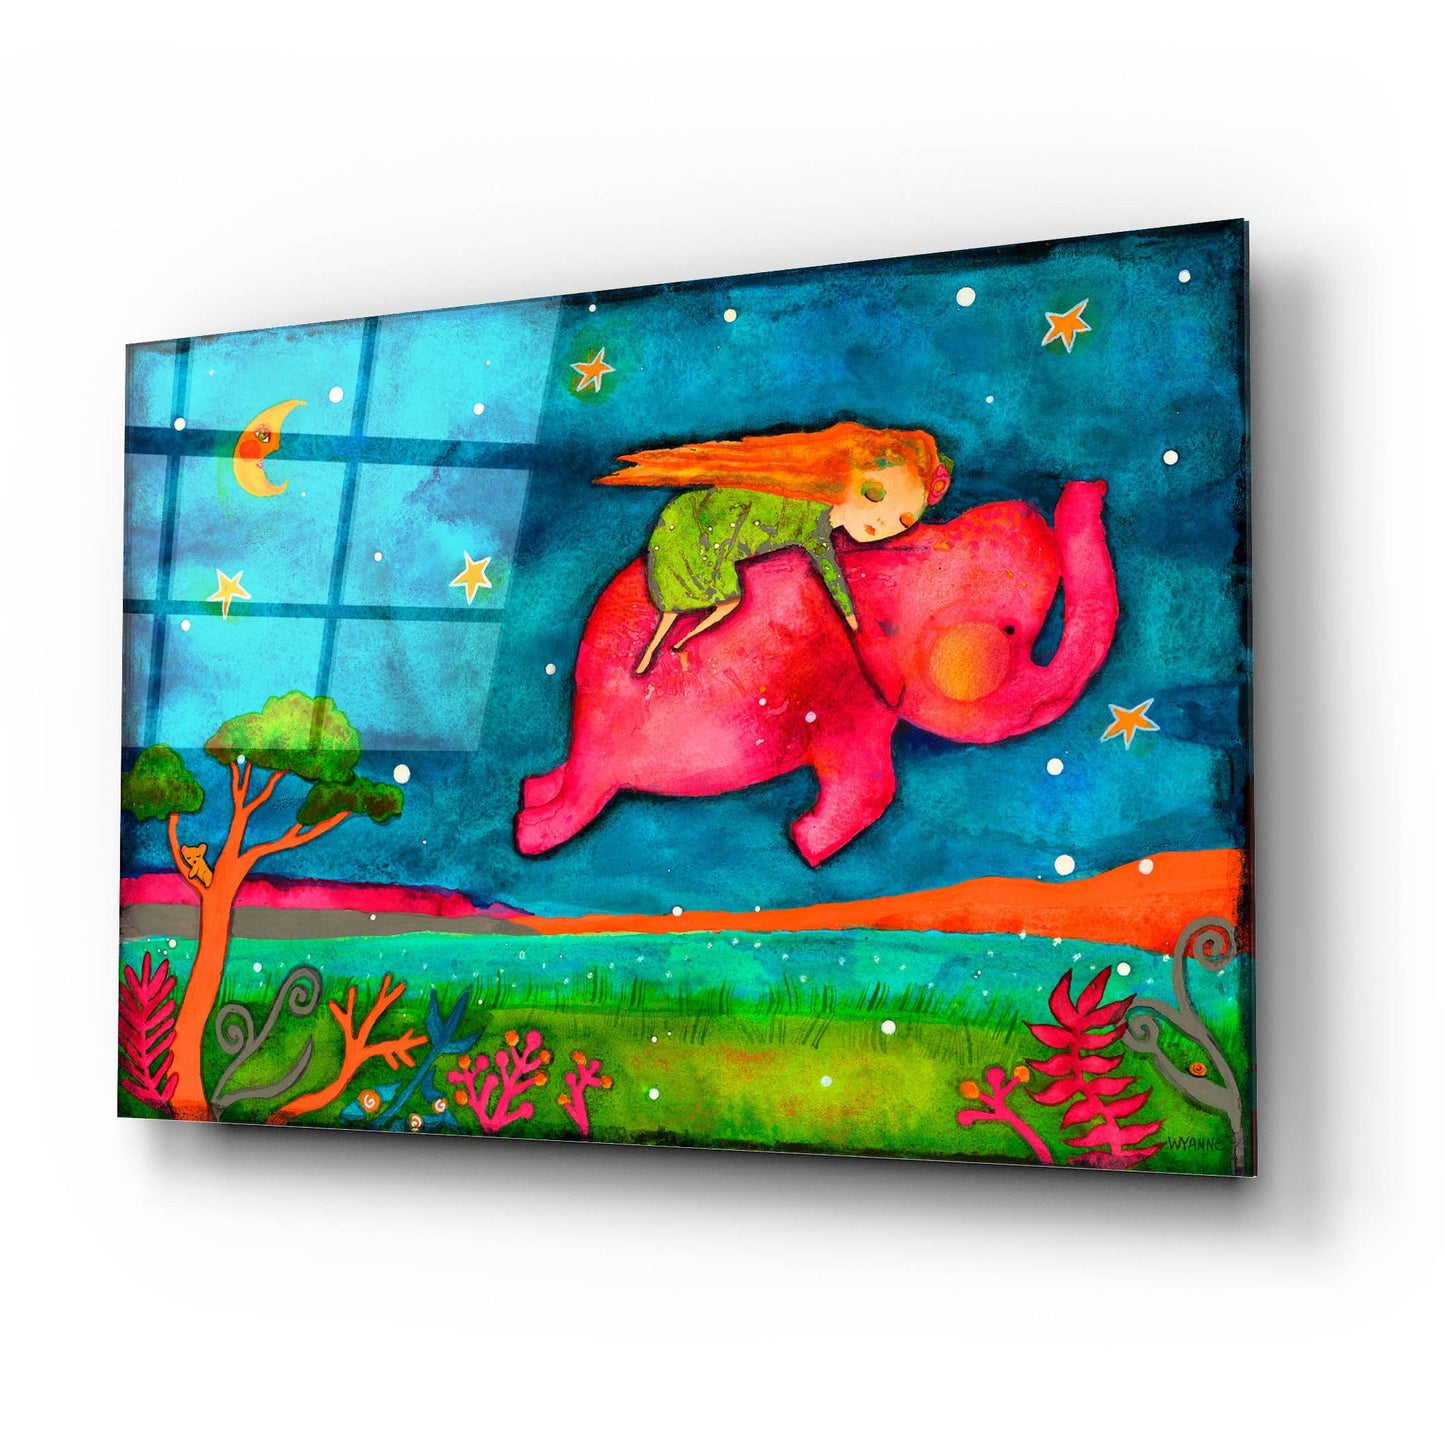 Epic Art 'Come Dream With Me' by Wyanne, Acrylic Glass Wall Art,24x16